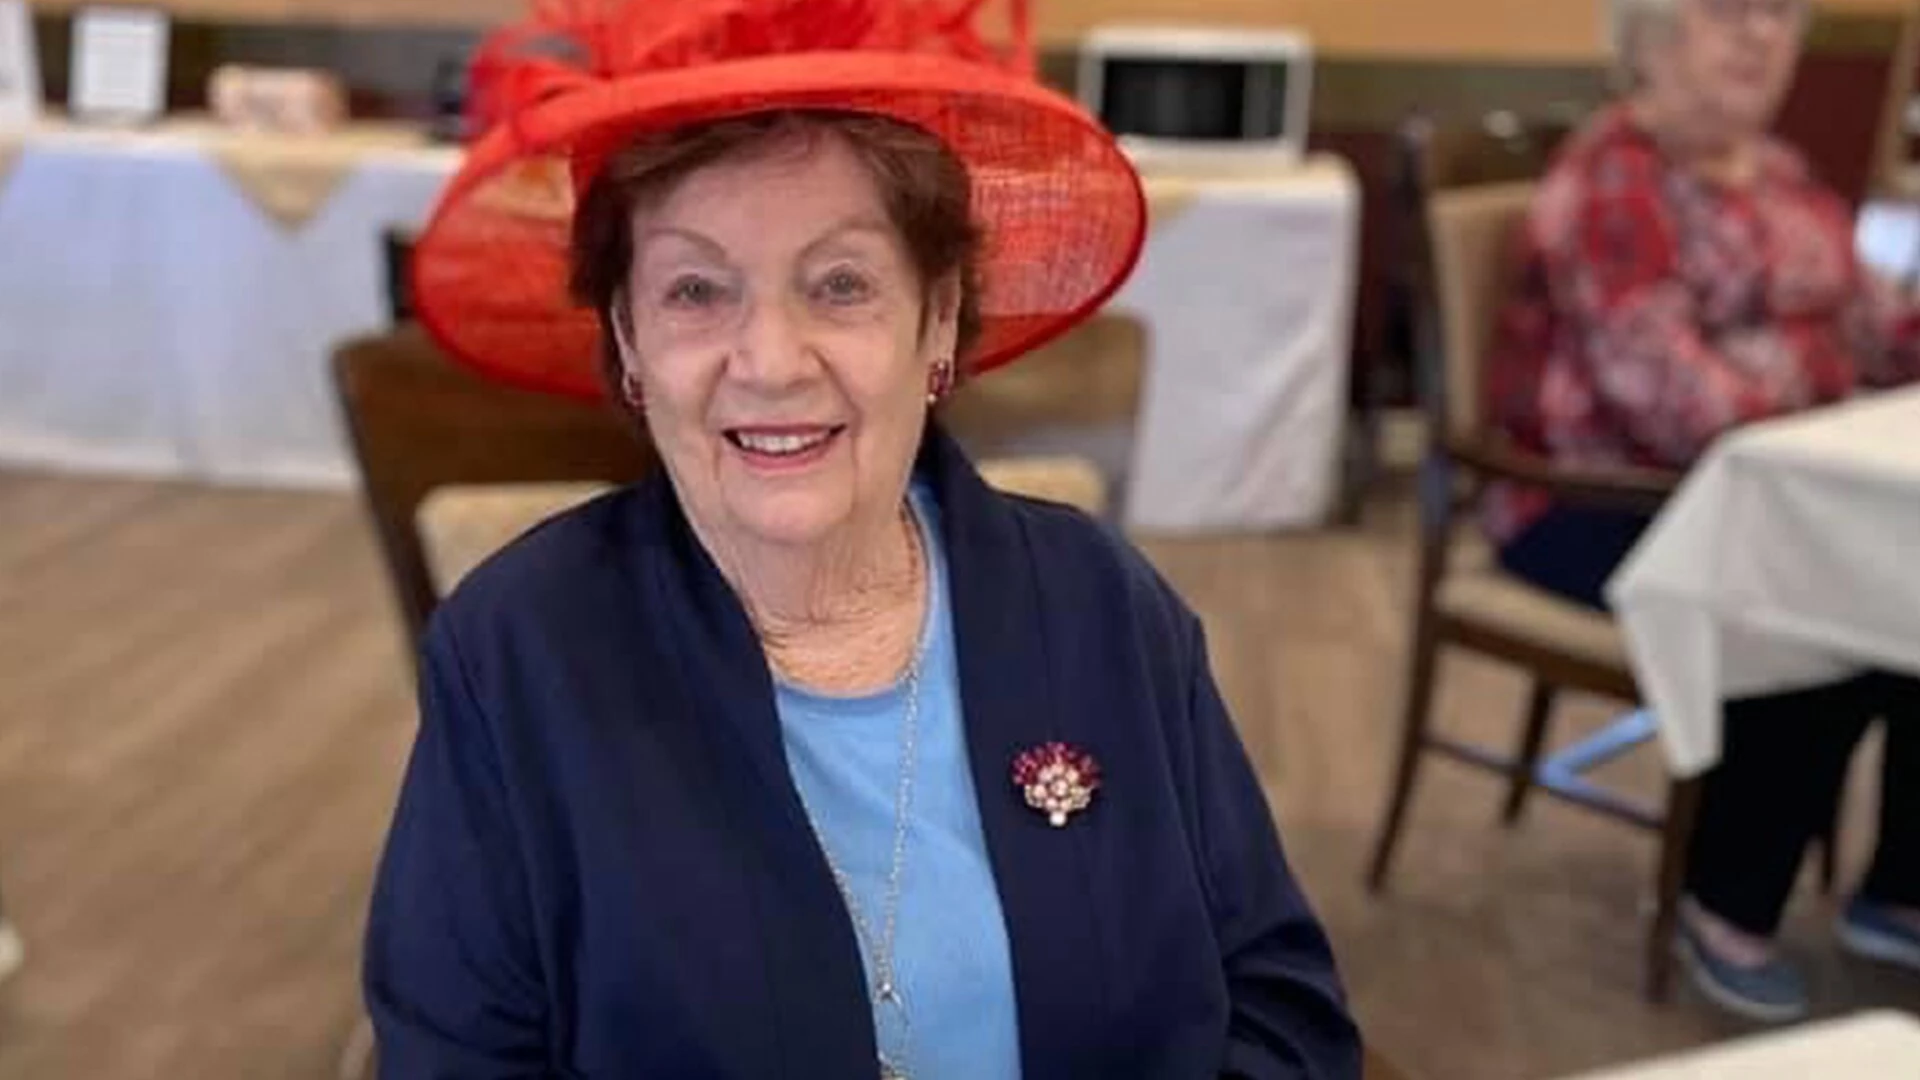 An elderly lady with a red hat